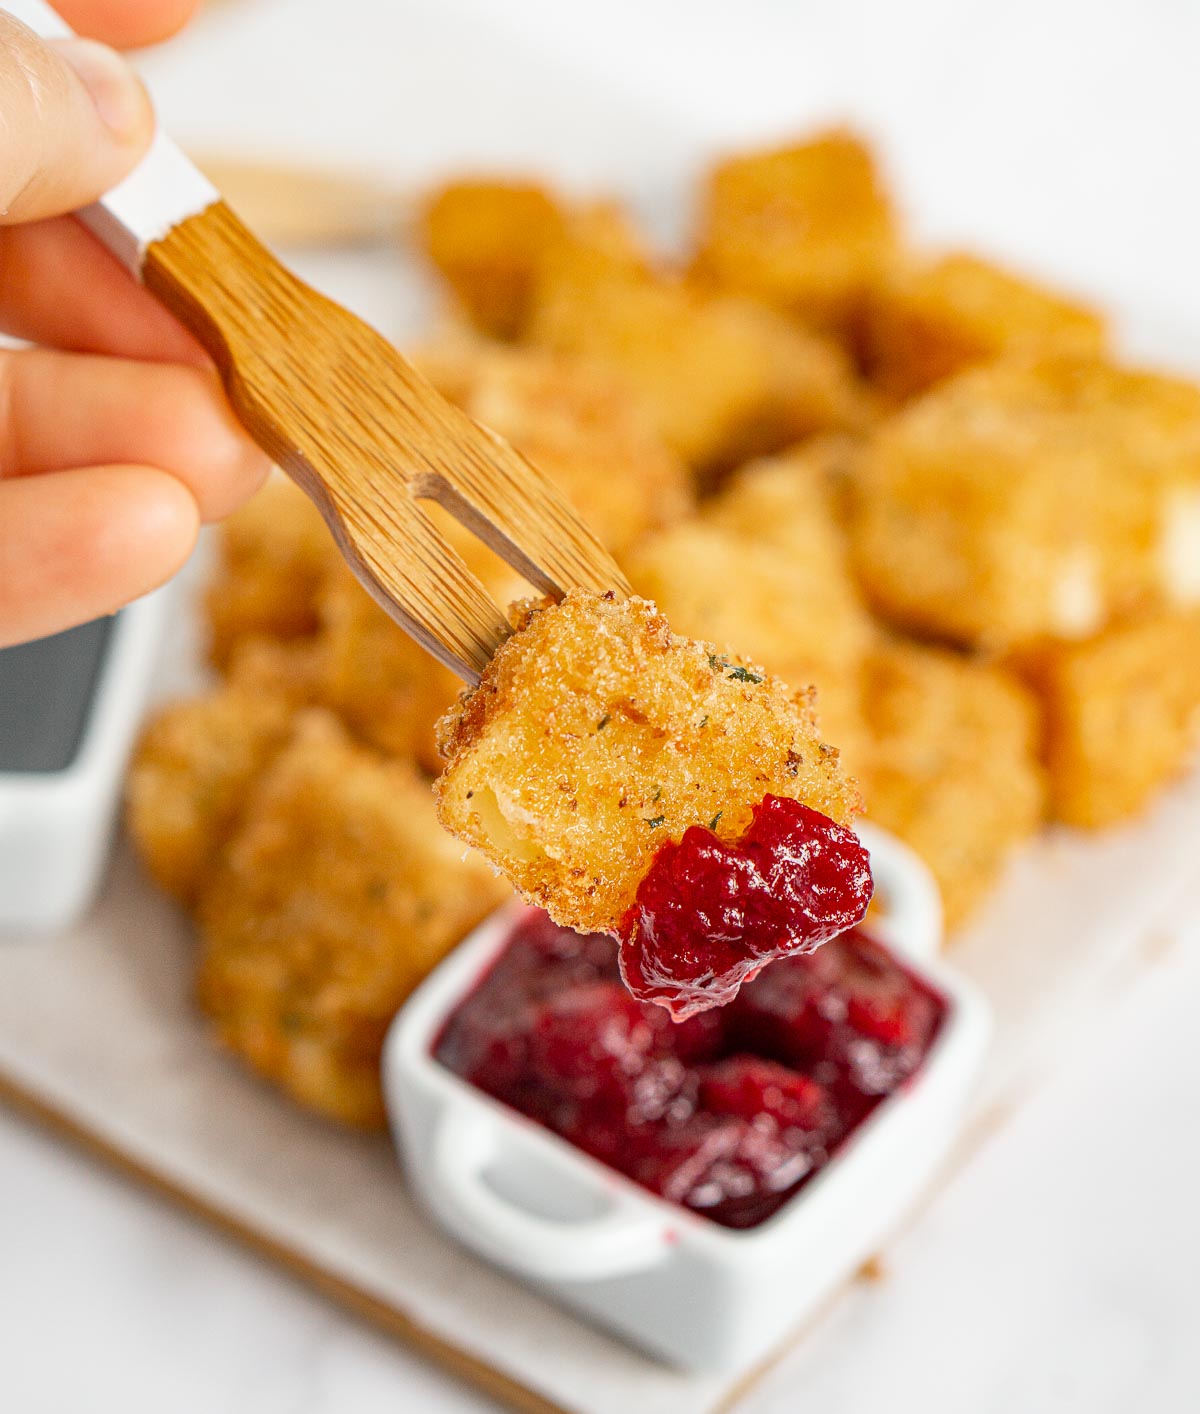 Dipping fried brie appetizer into cranberry sauce